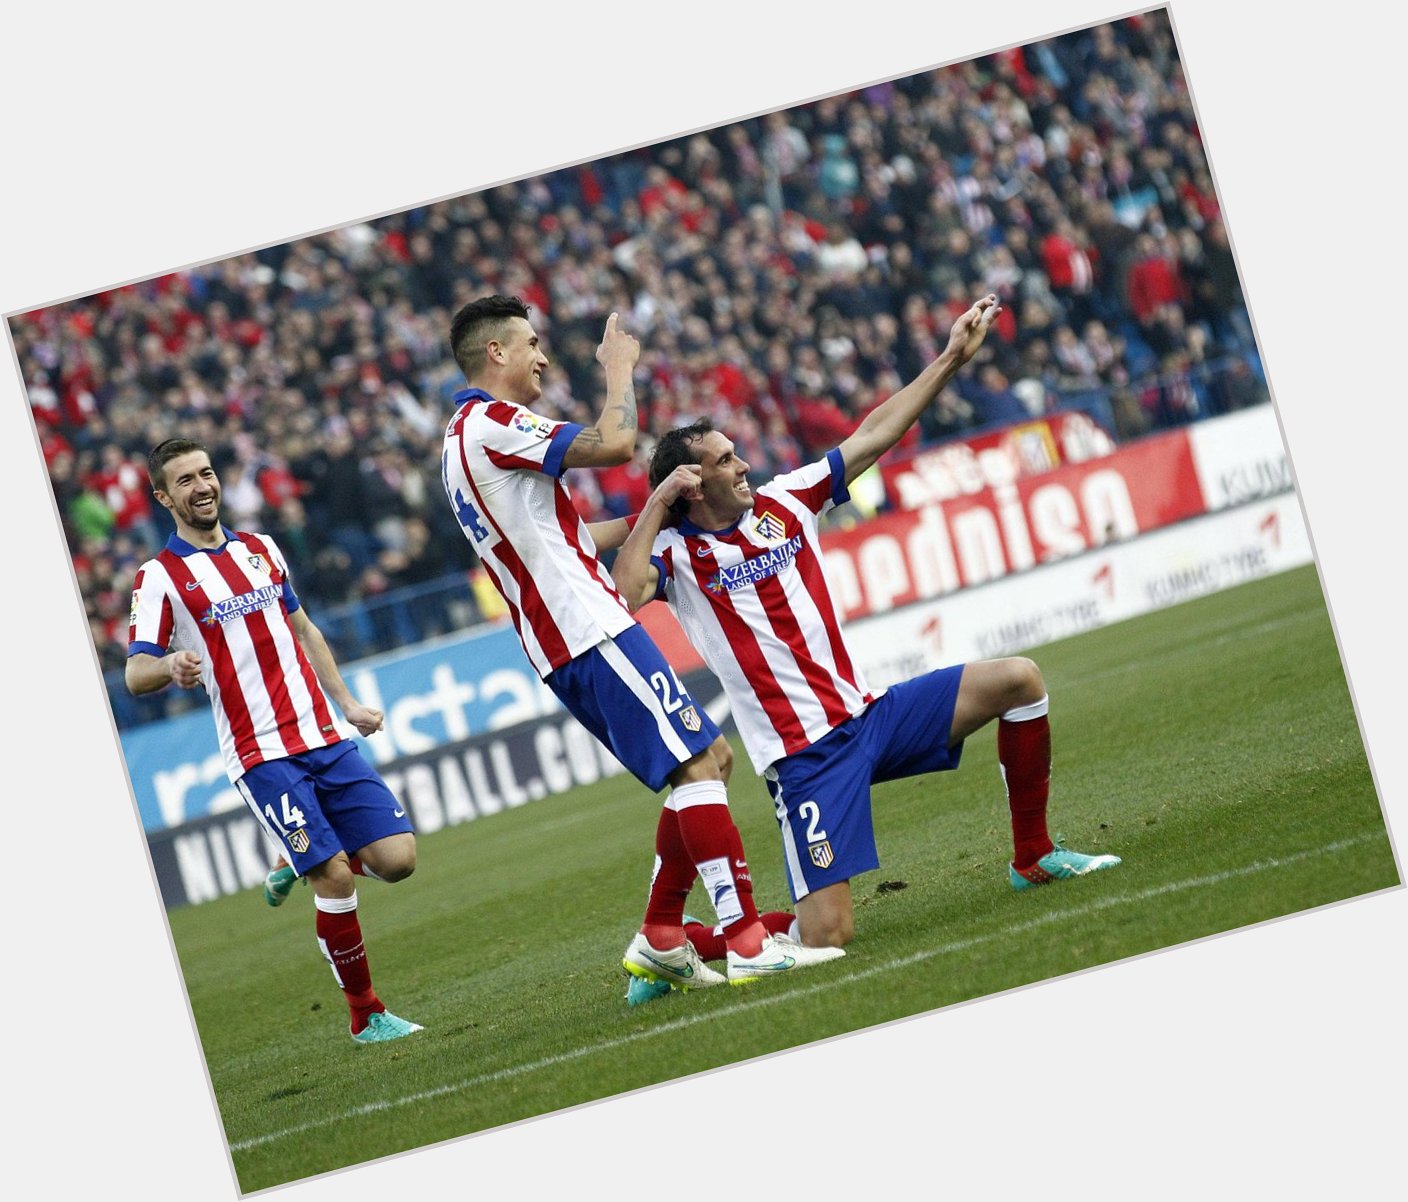 A very happy birthday to Atlético defender Diego Godín, who turns 29 today. Wonder if he\s into \raggaeton\? 